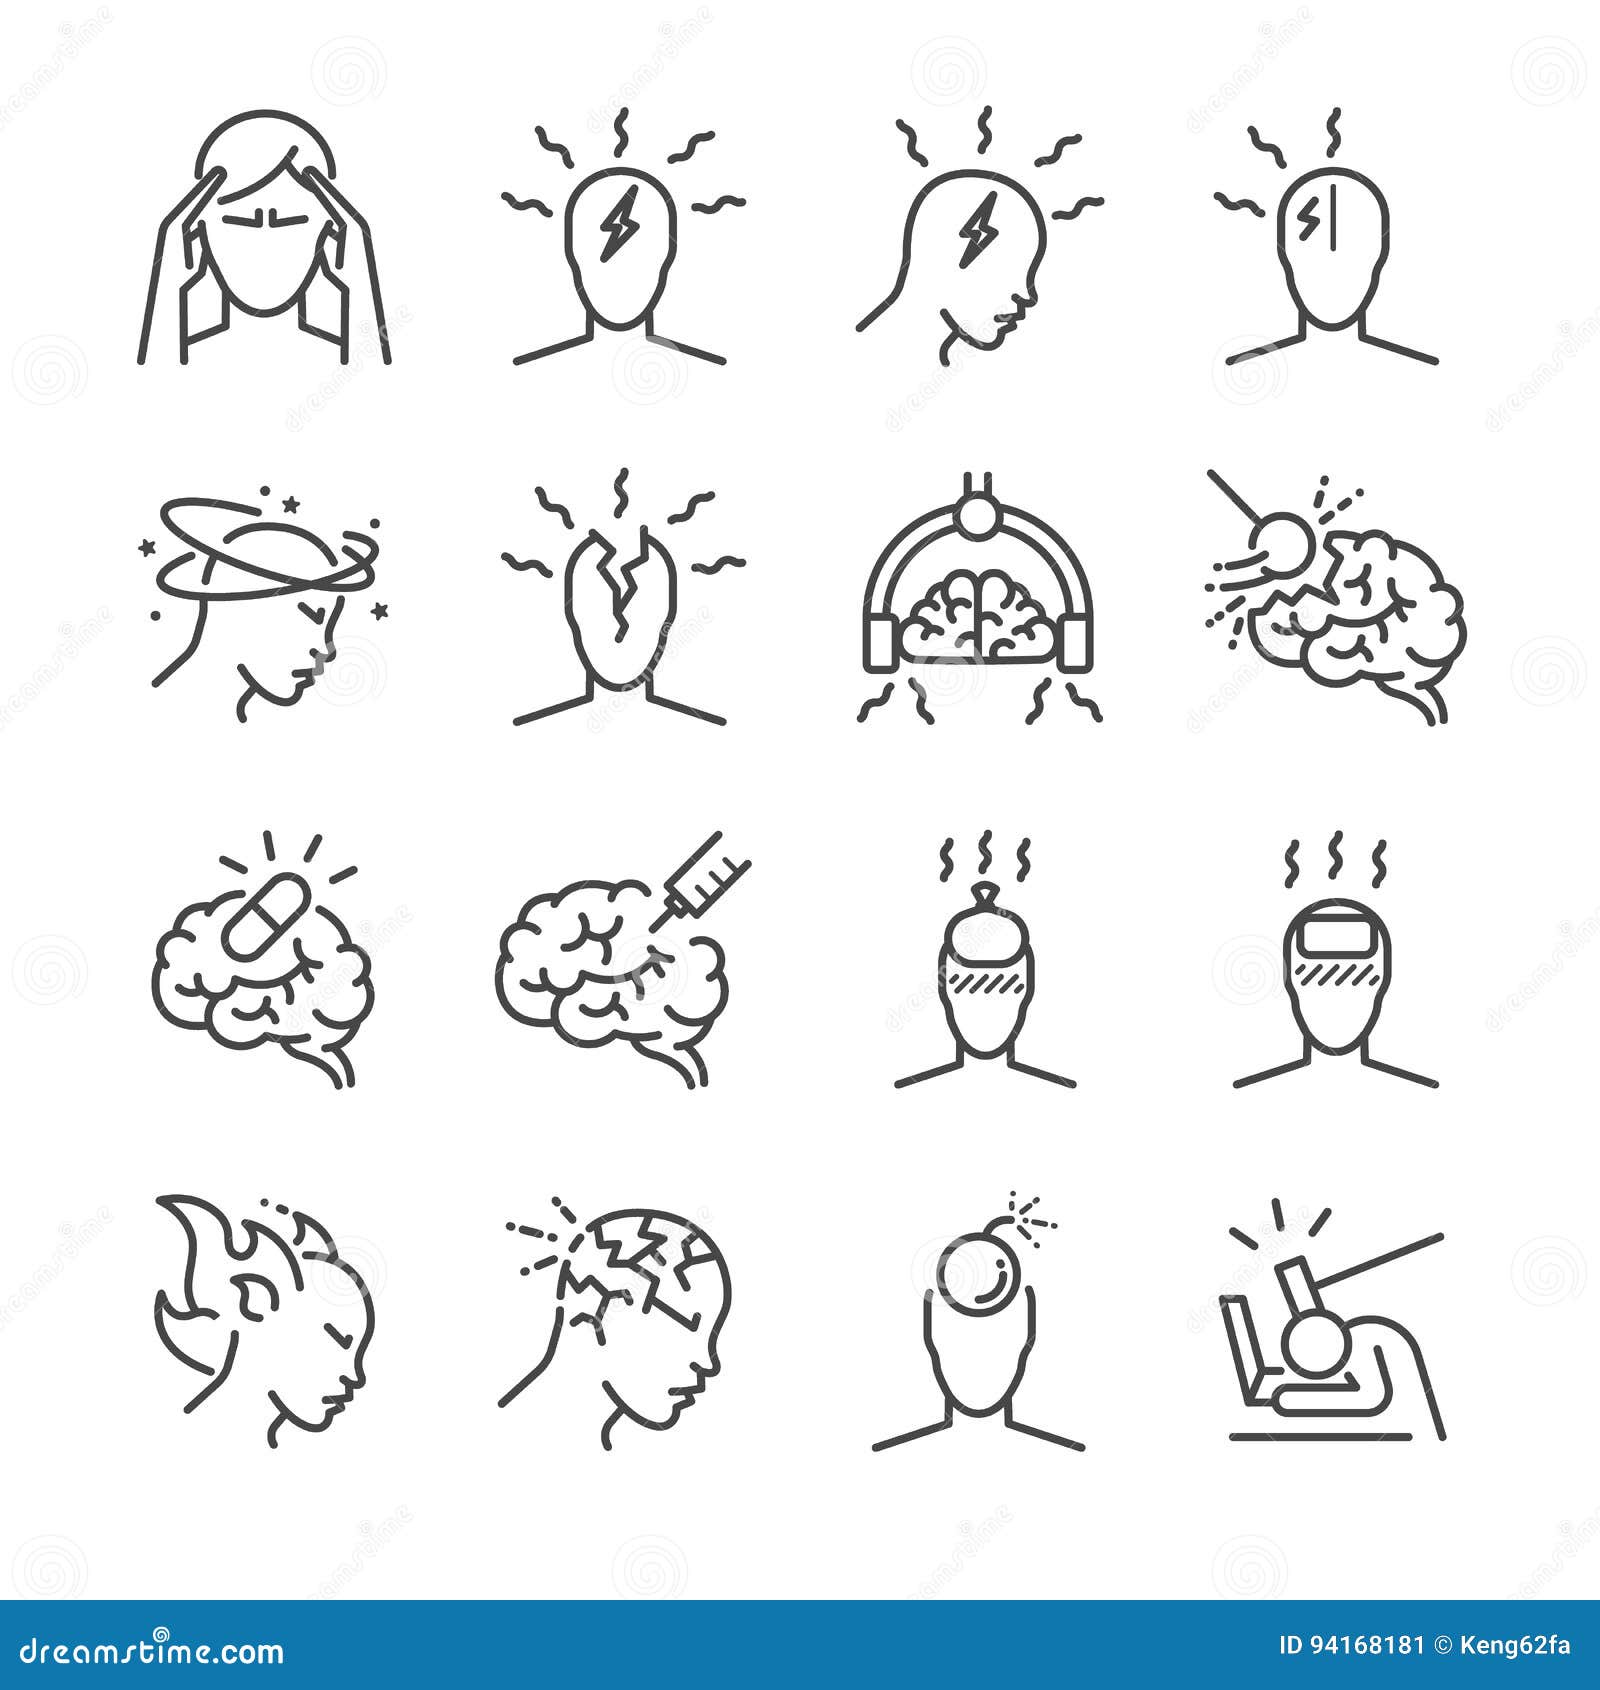 headache line icon set. included the icons as tension headaches, cluster headaches, migraine, brain symptom and more.